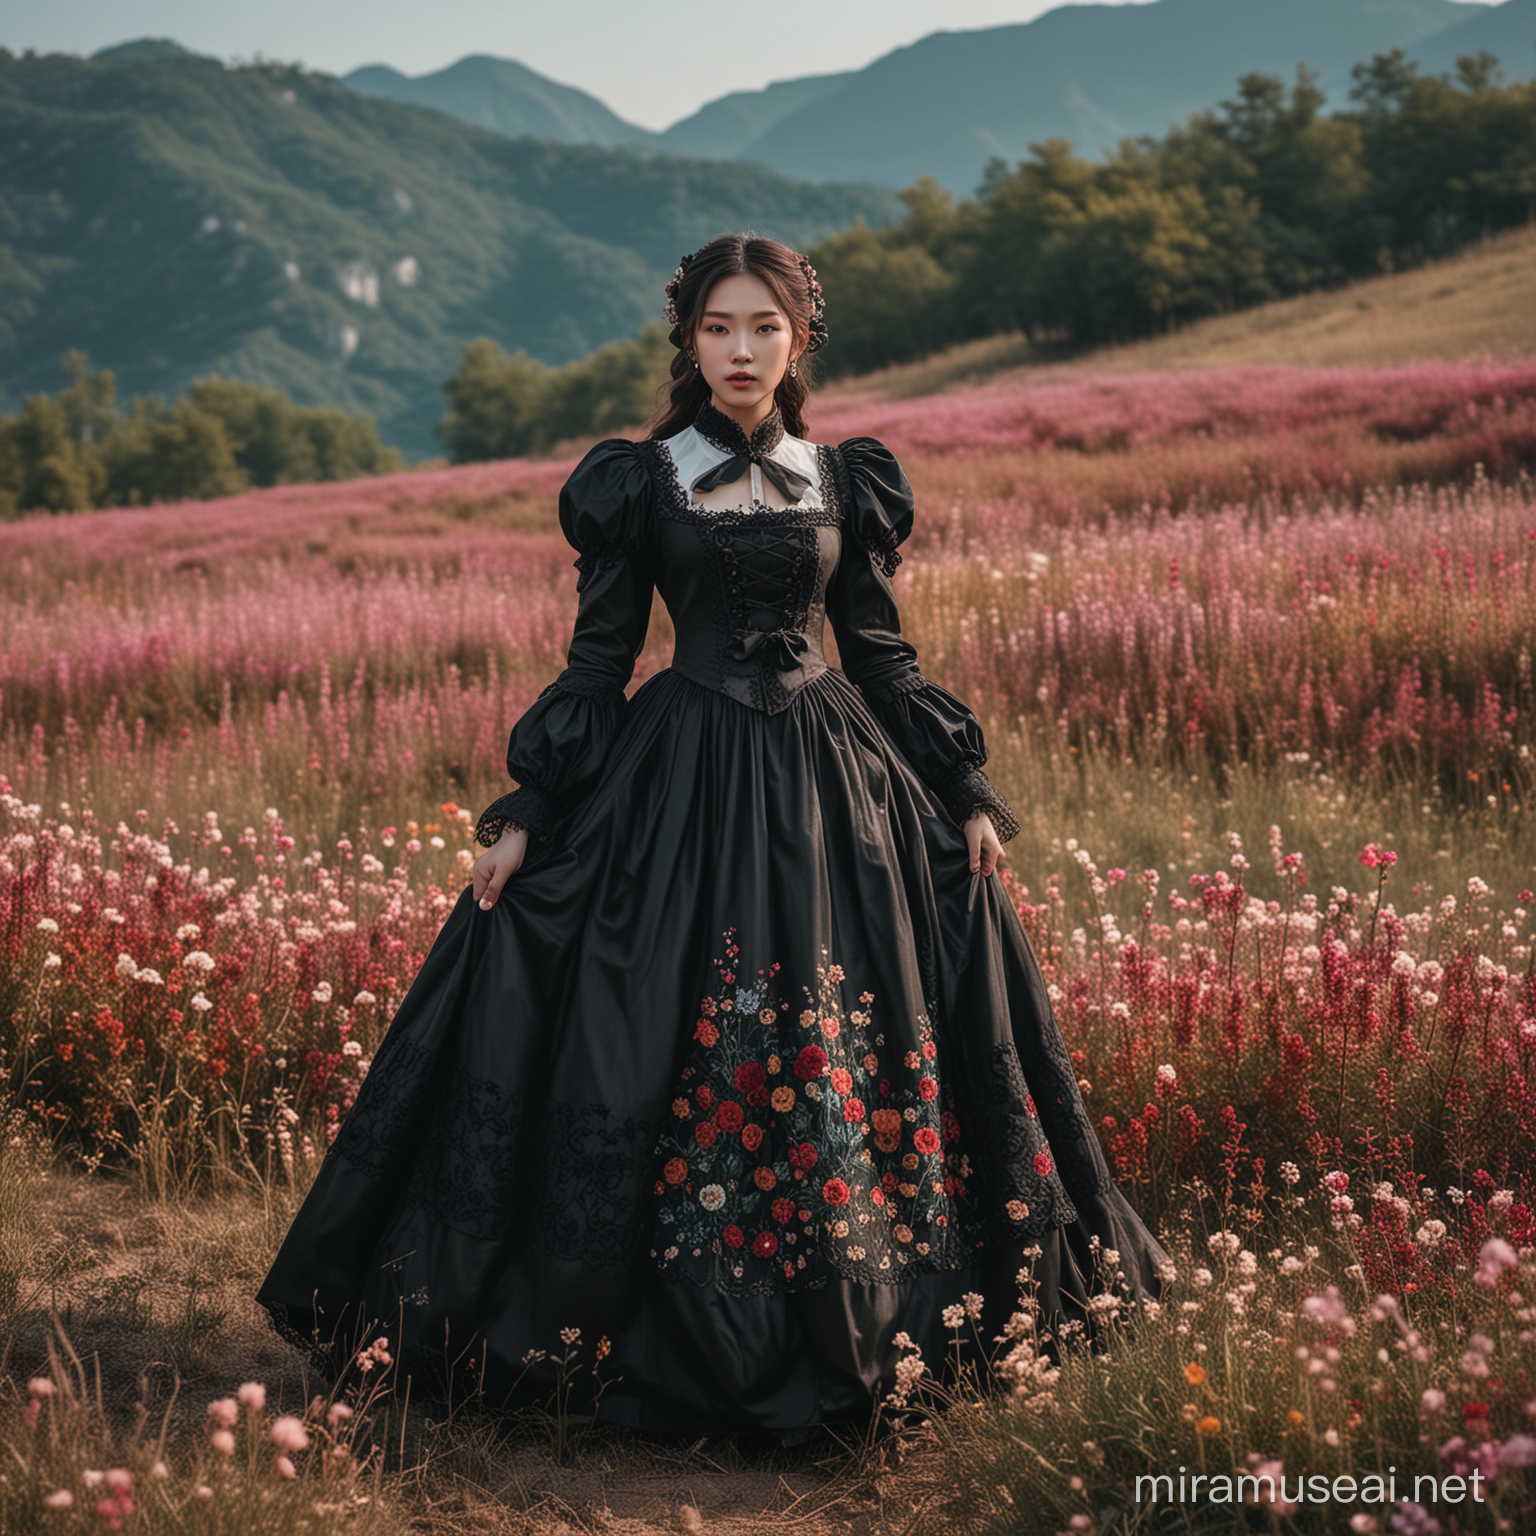 Gothic Woman Amidst Richly Colored Mountain Flower Field